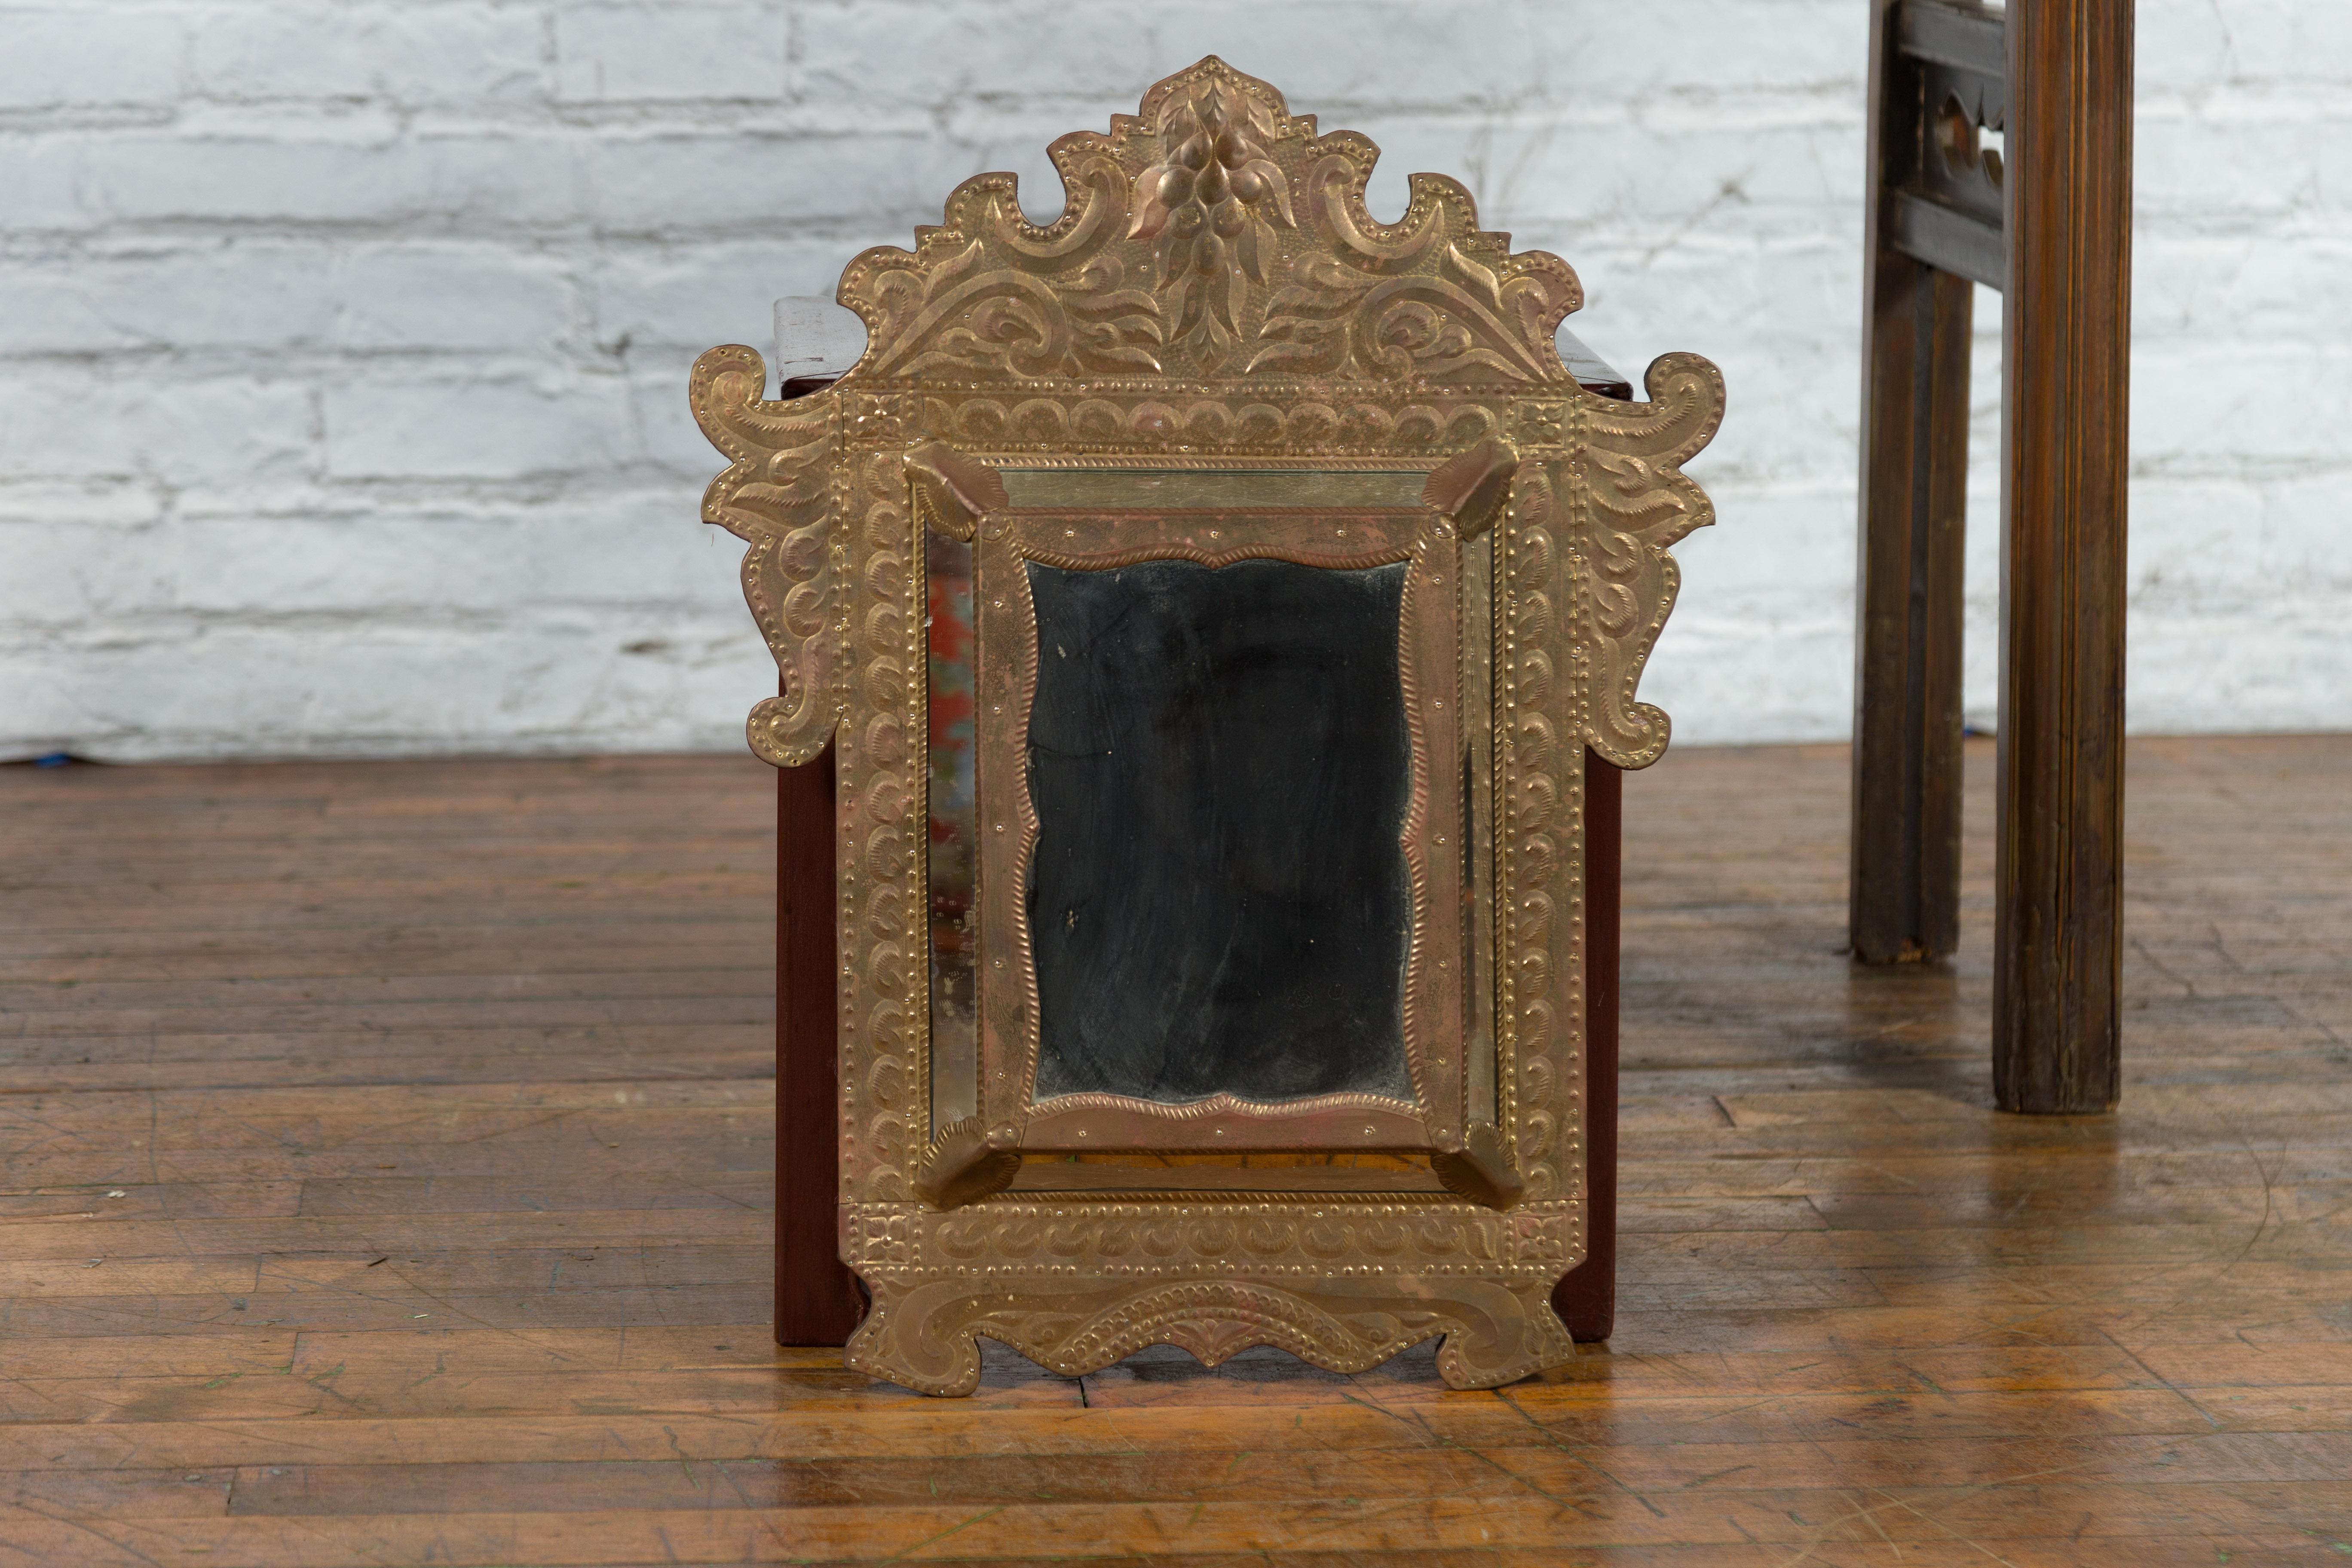 A vintage Indian pareclose mirror from the mid 20th century with gilded metal sheathing over wooden frame. Created in India during the Midcentury period, this small mirror attracts our attention with its ornate crest and golden colors. Showcasing a